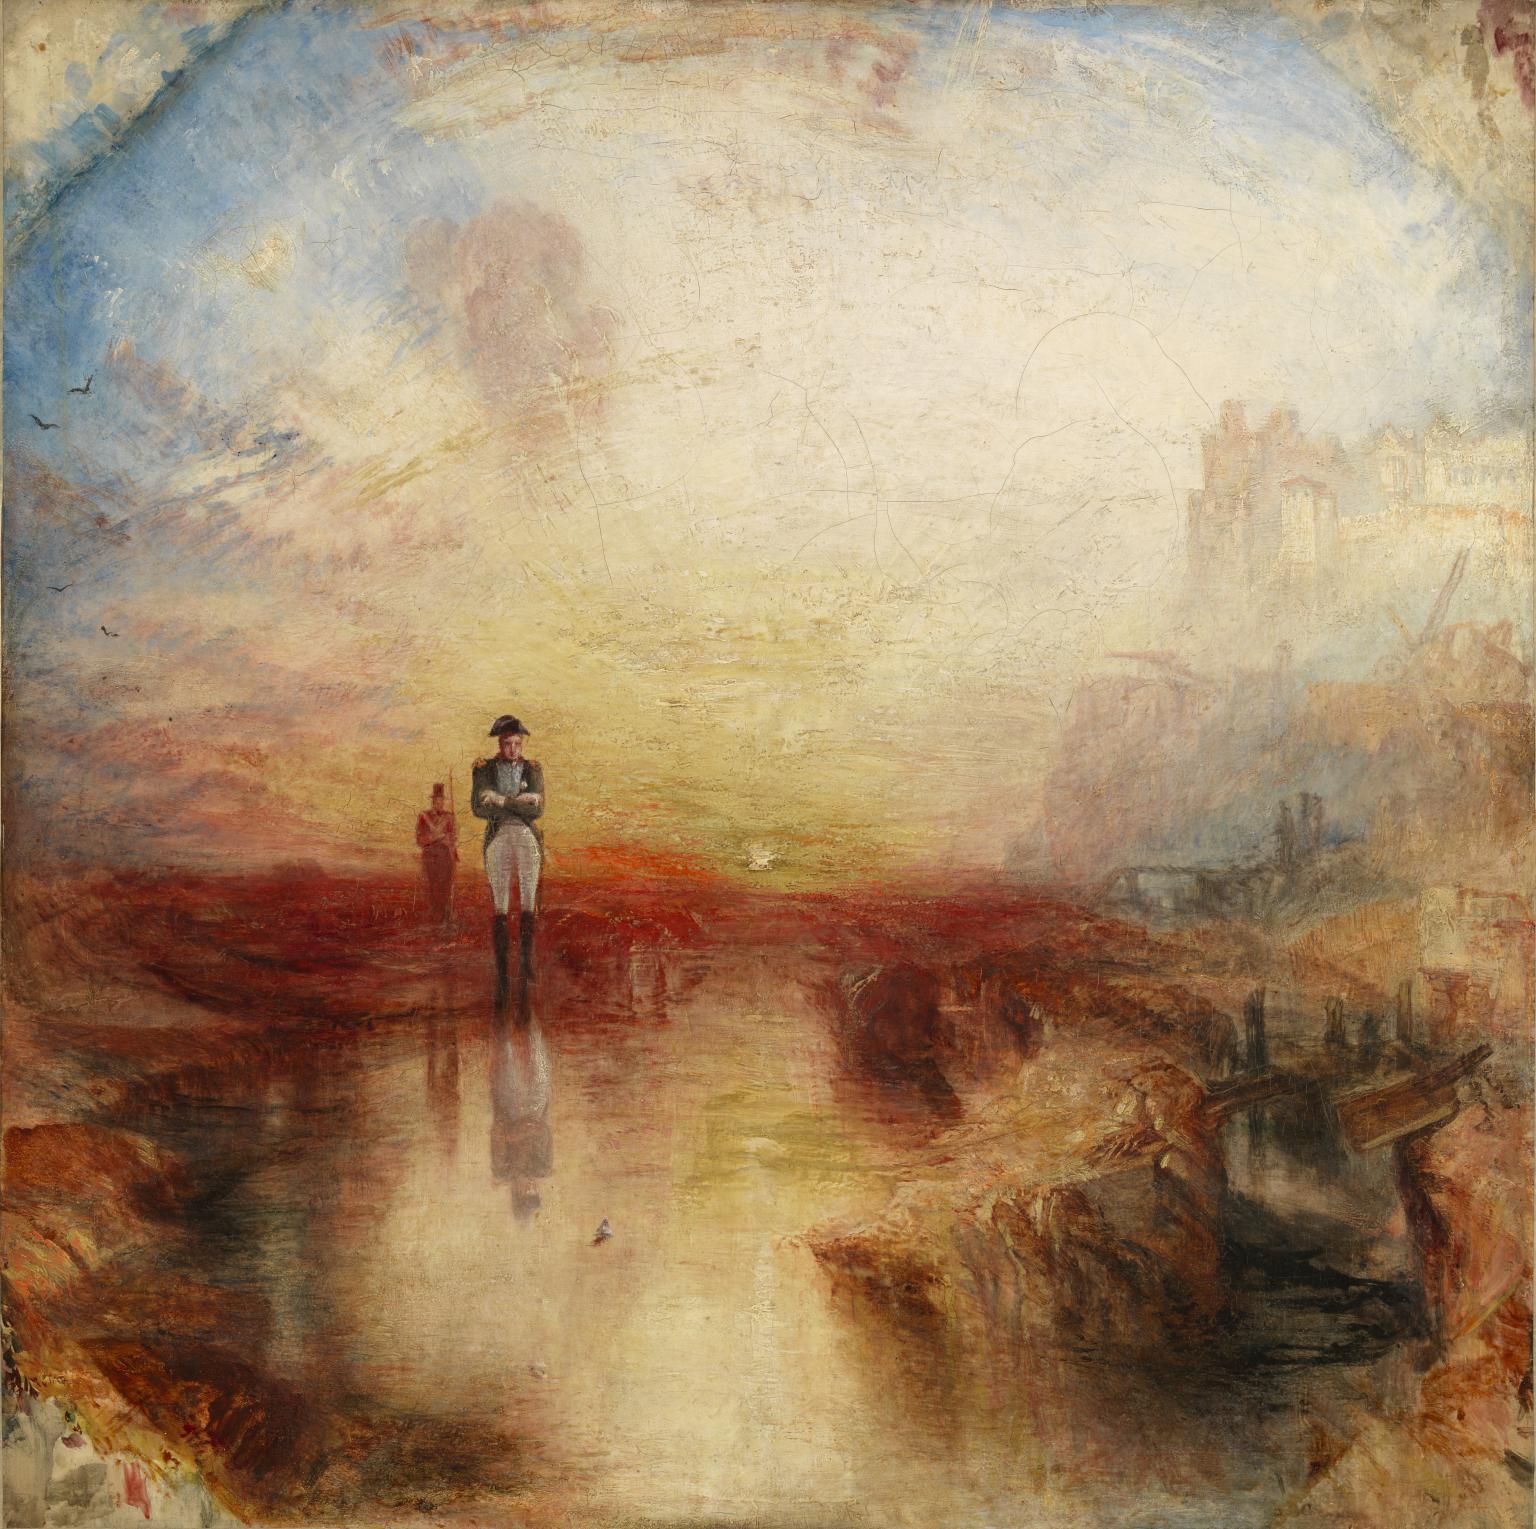 War. The Exile and the Rock Limpet exhibited 1842 by Joseph Mallord William Turner 1775-1851